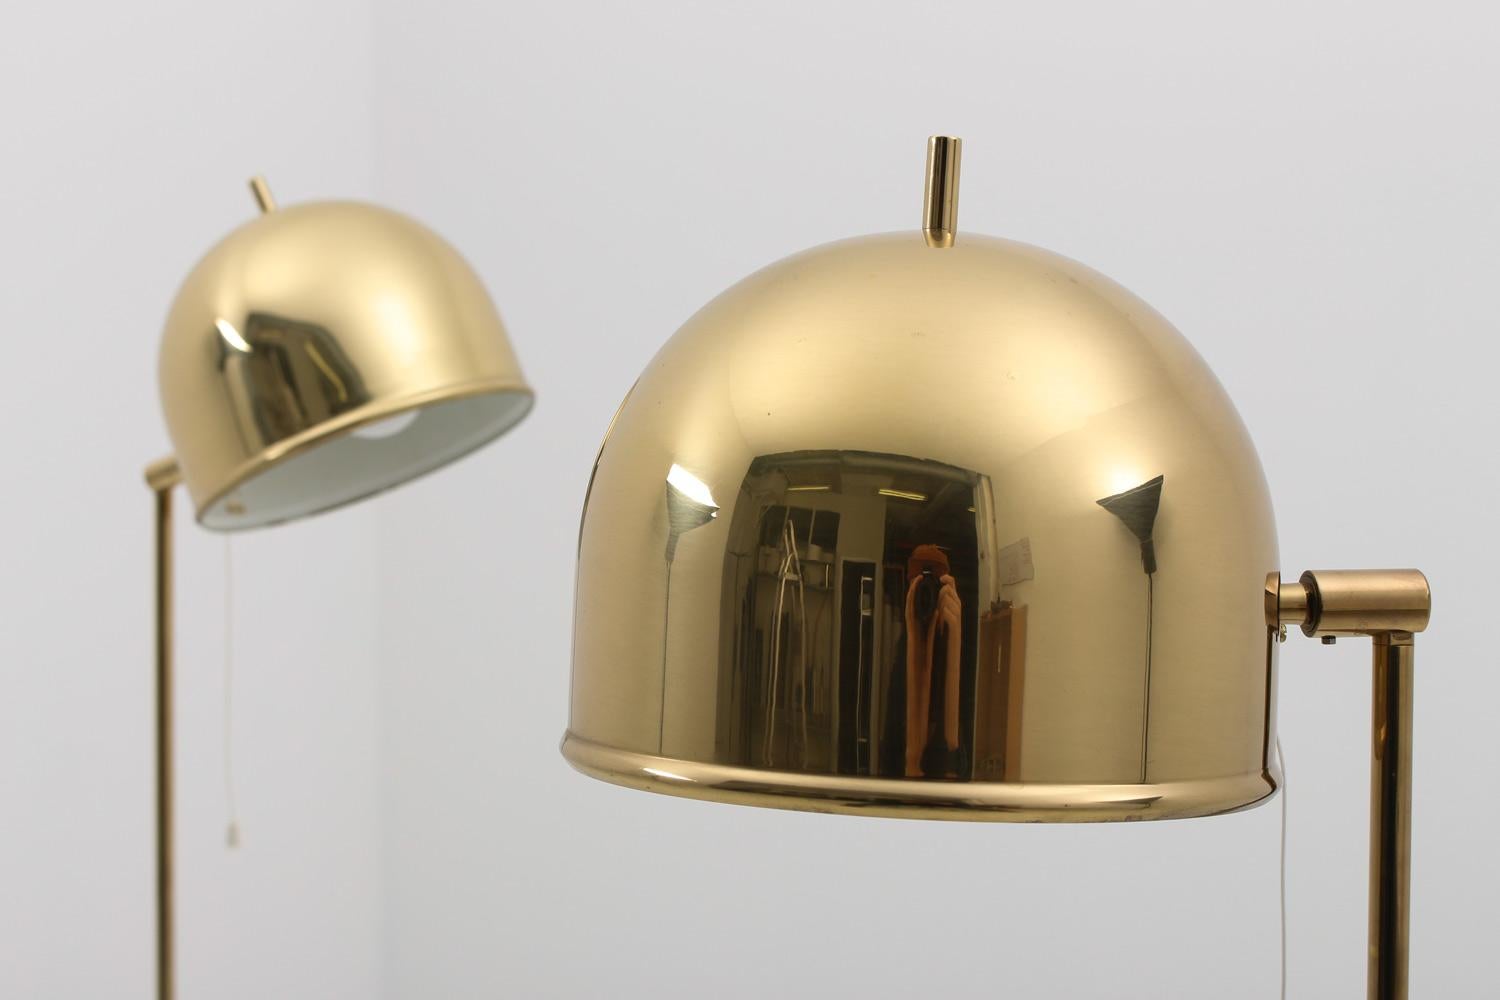 Scandinavian floor lamps model G-075 by Eje Ahlgren for Bergboms, Sweden, 1960s.
The lamps are made of solid brass.

Condition: Excellent original condition except for some minimal dents and scraches on the feet.